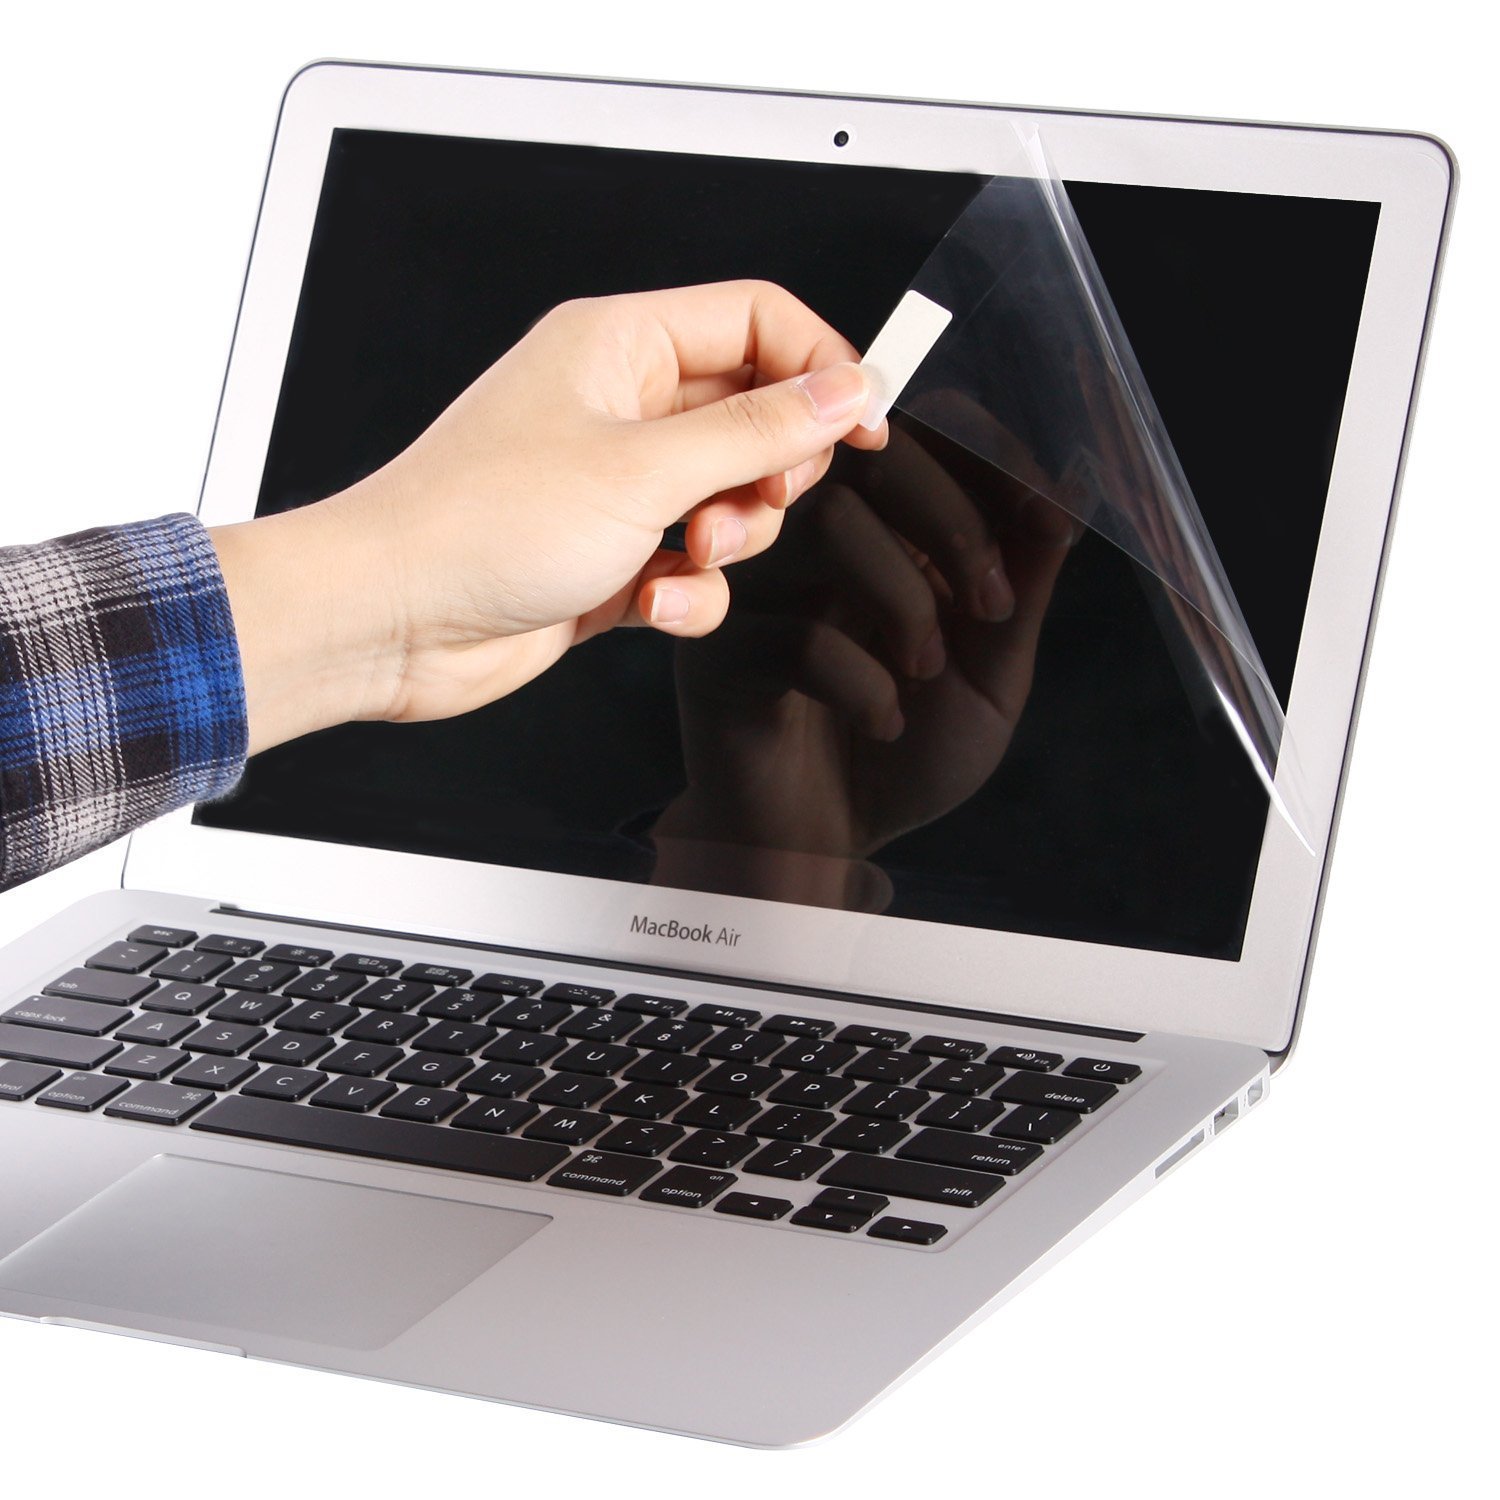 MacBook Air keyboard cover, screen protector and cleaner